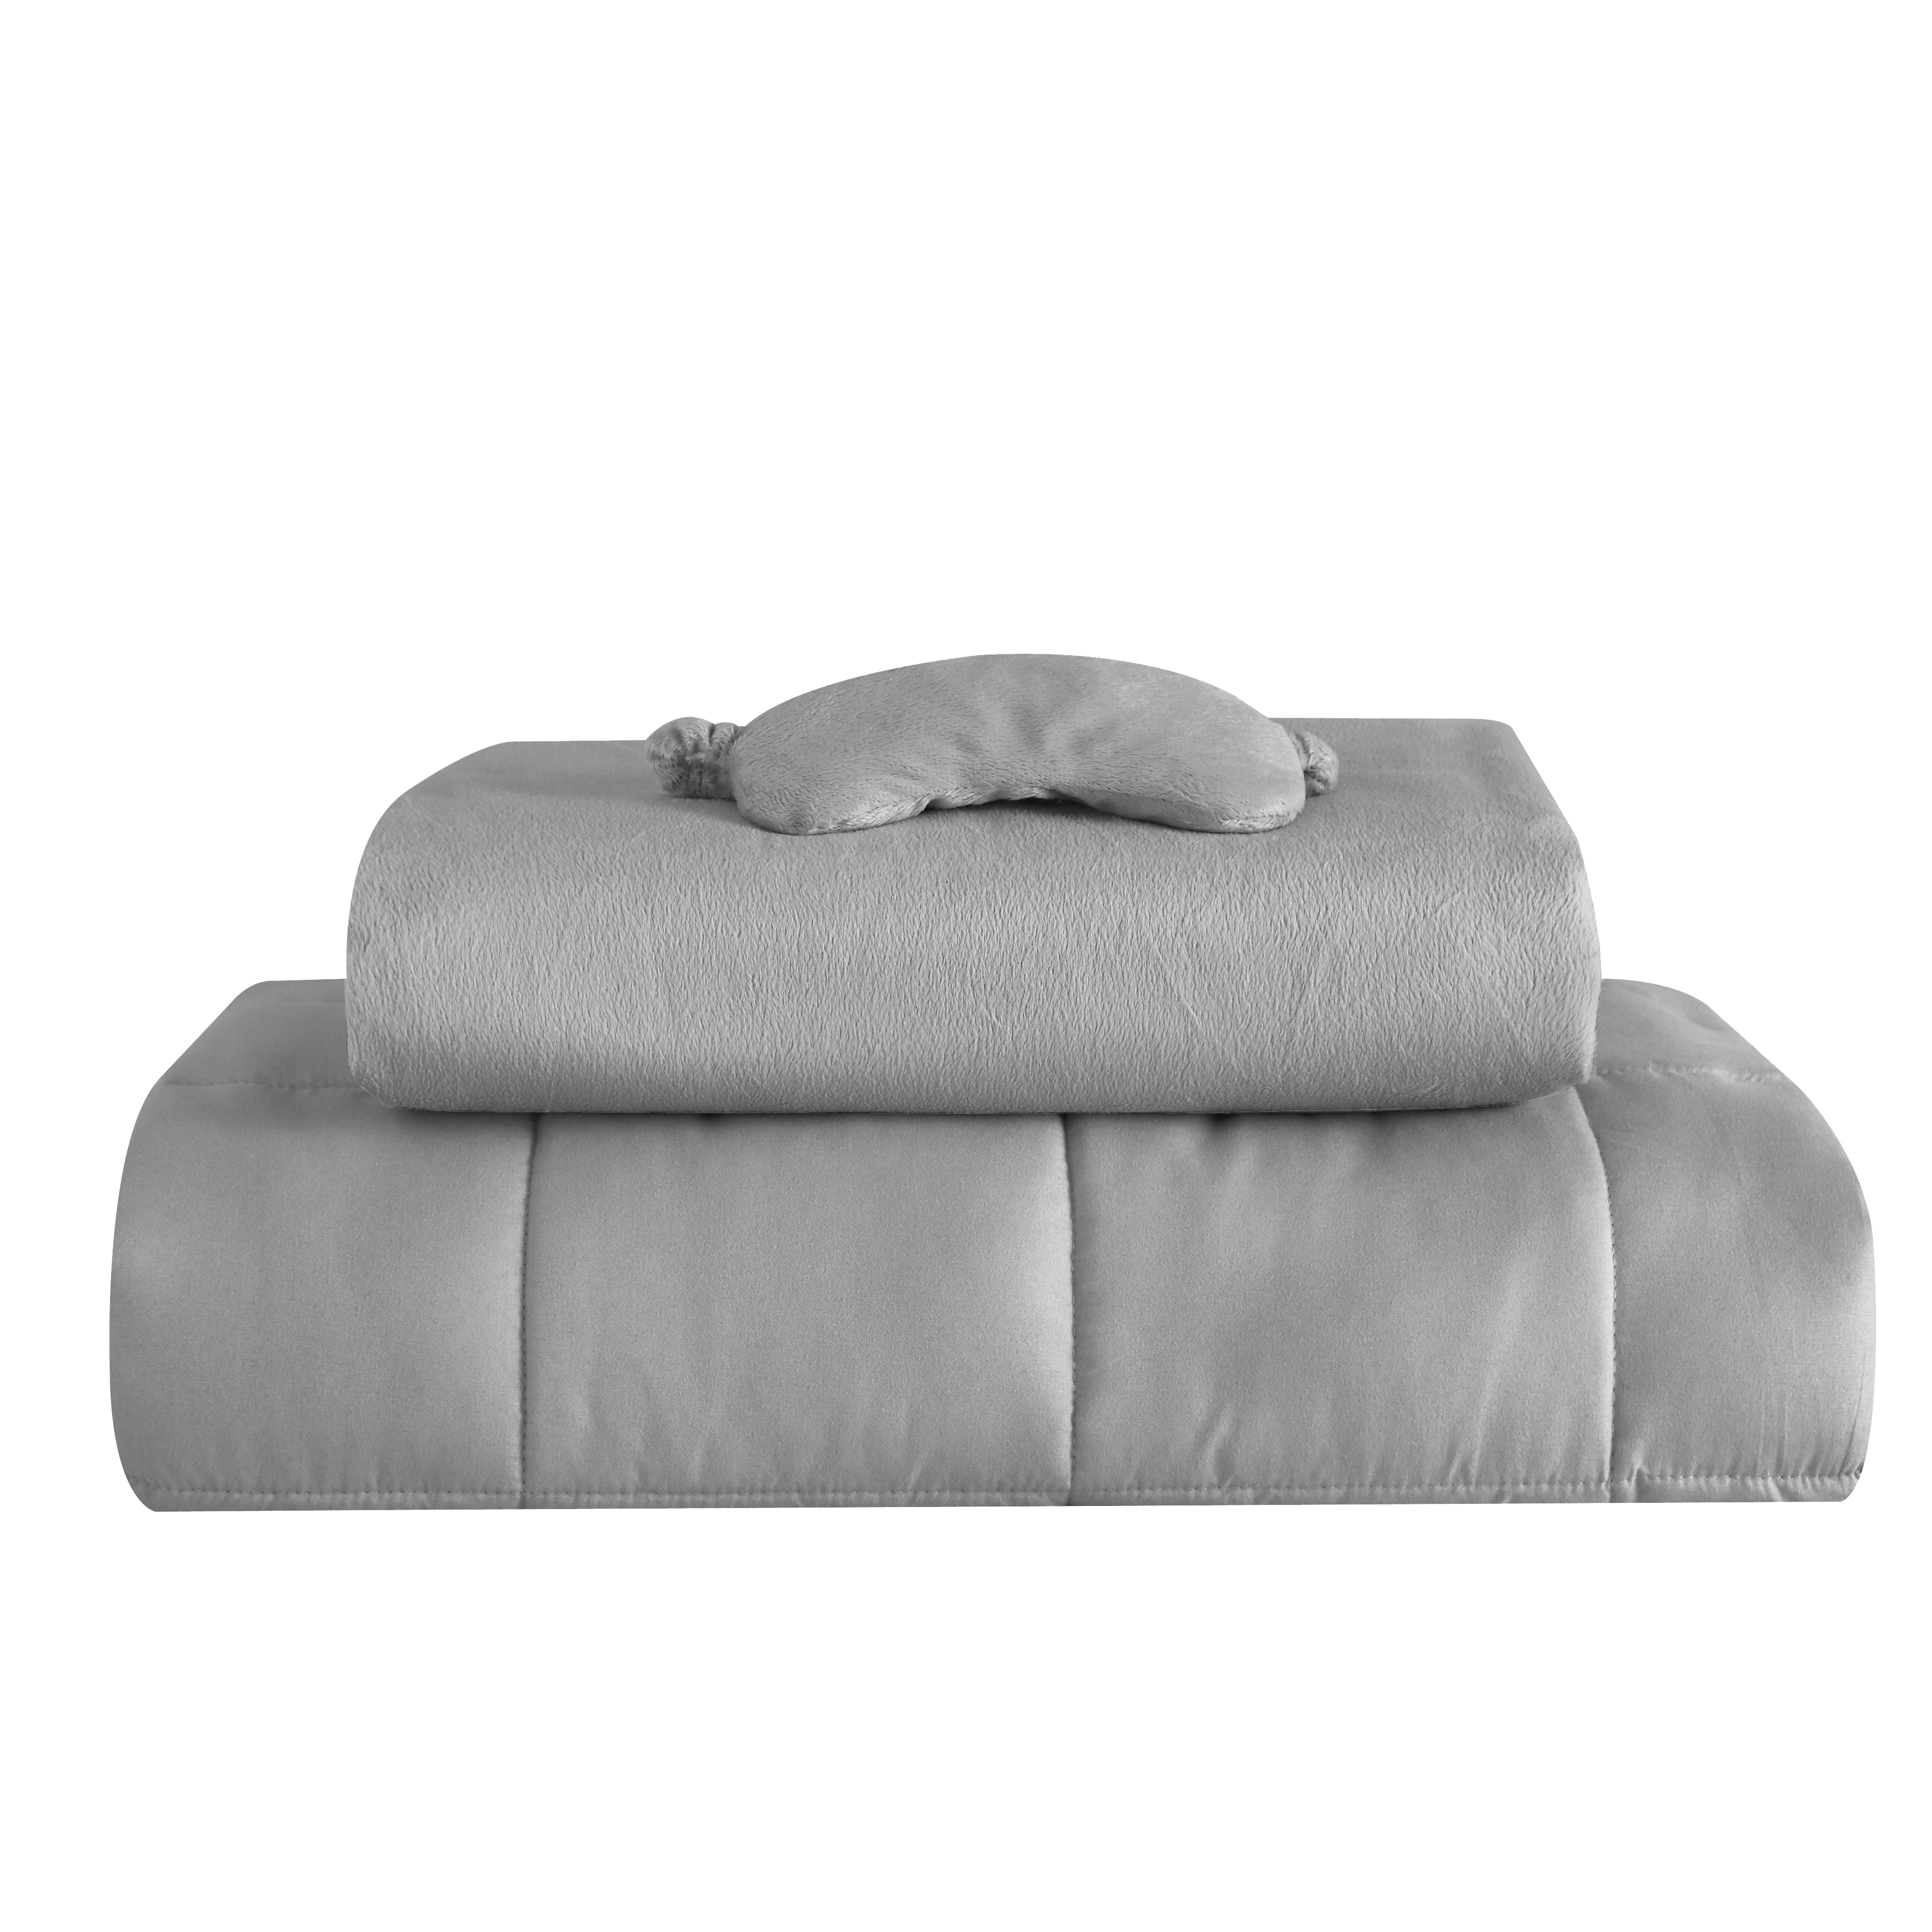 Well Being 3 Piece Weighted Blanket Set, Duvet Cover Blanket